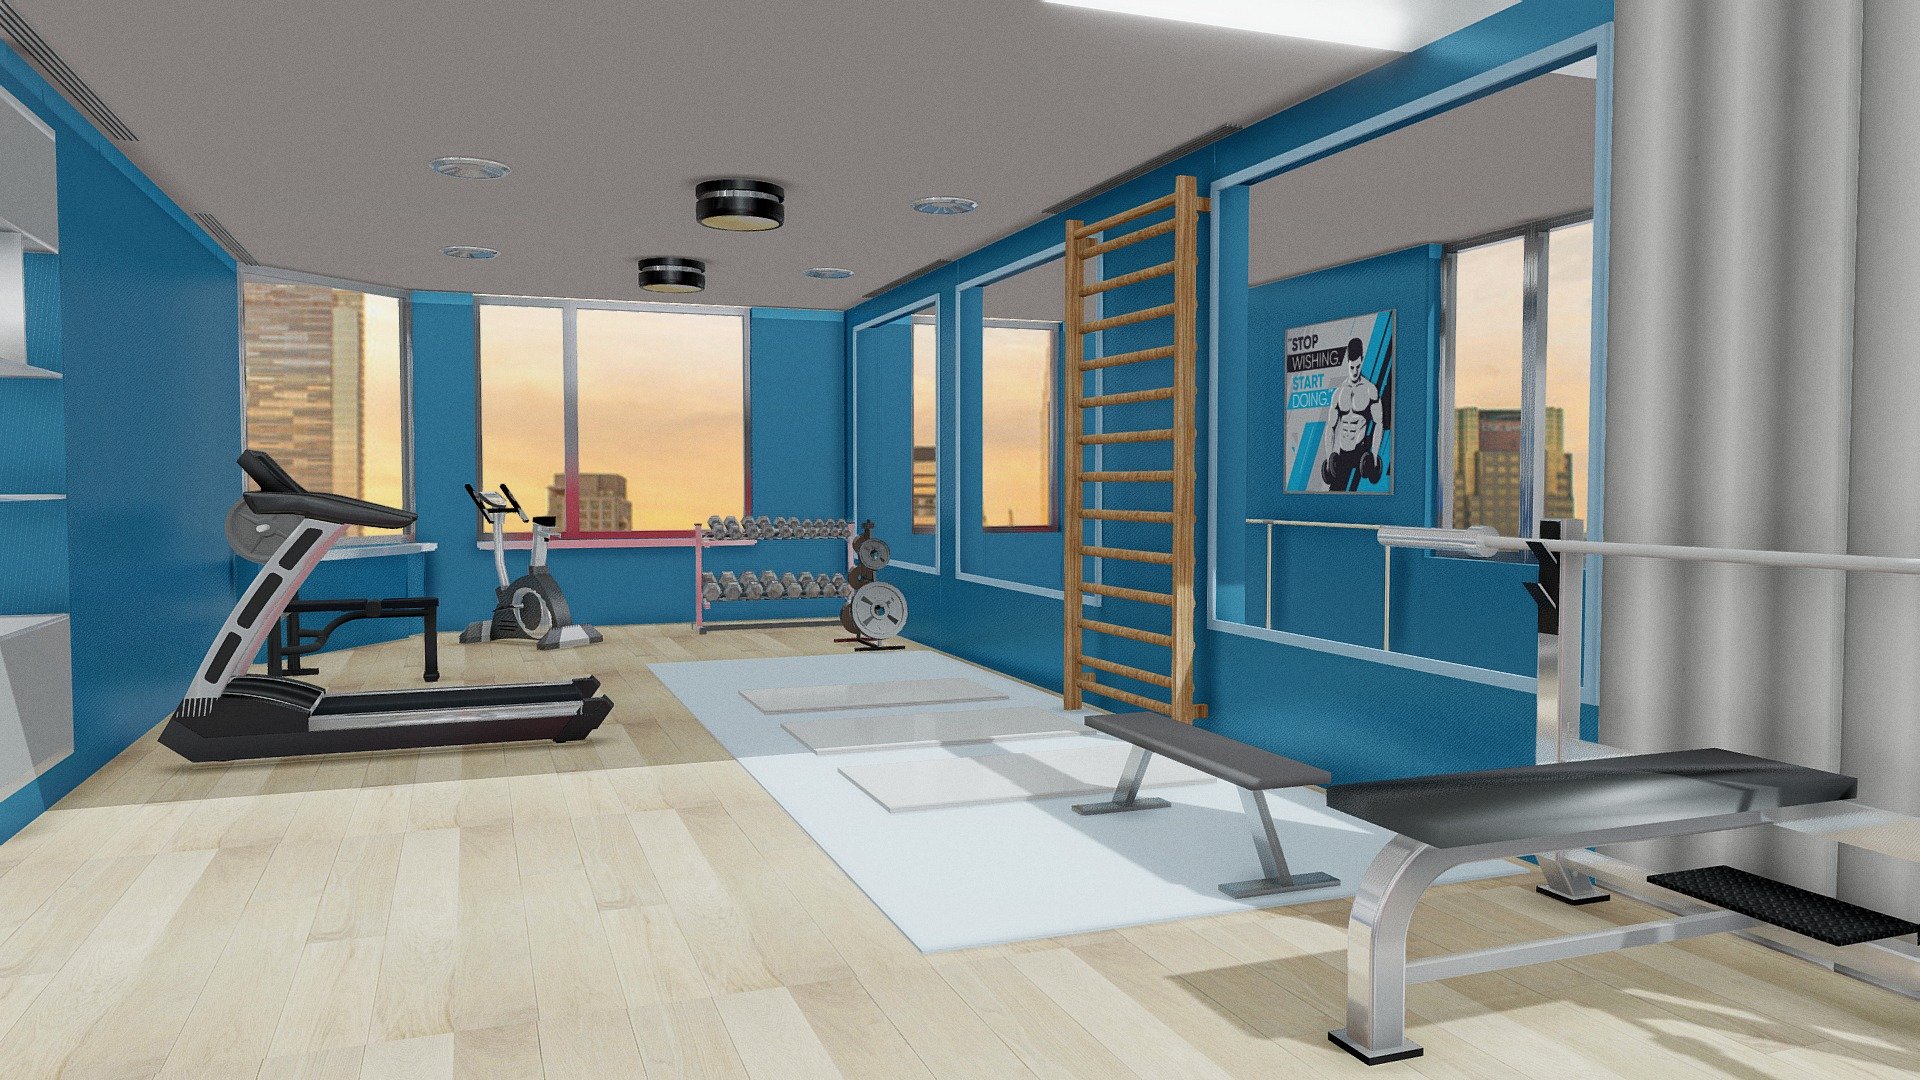 Featuring a large, fully equipped fitness room with floor to ceiling glass walls and industrial lighting, guests can stay fit 3d model